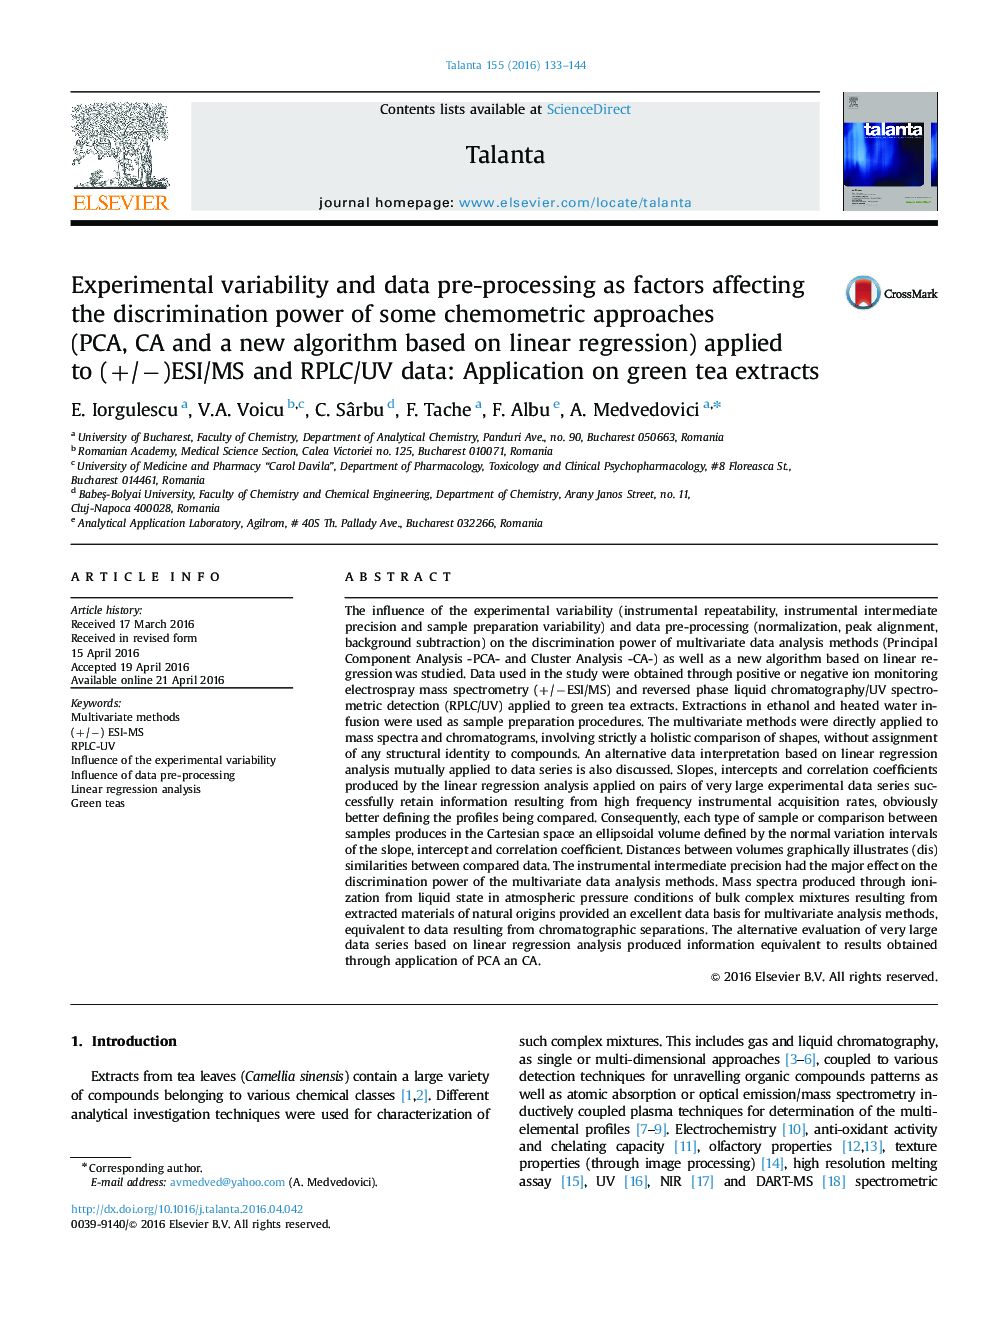 Experimental variability and data pre-processing as factors affecting the discrimination power of some chemometric approaches (PCA, CA and a new algorithm based on linear regression) applied to (+/−)ESI/MS and RPLC/UV data: Application on green tea extrac